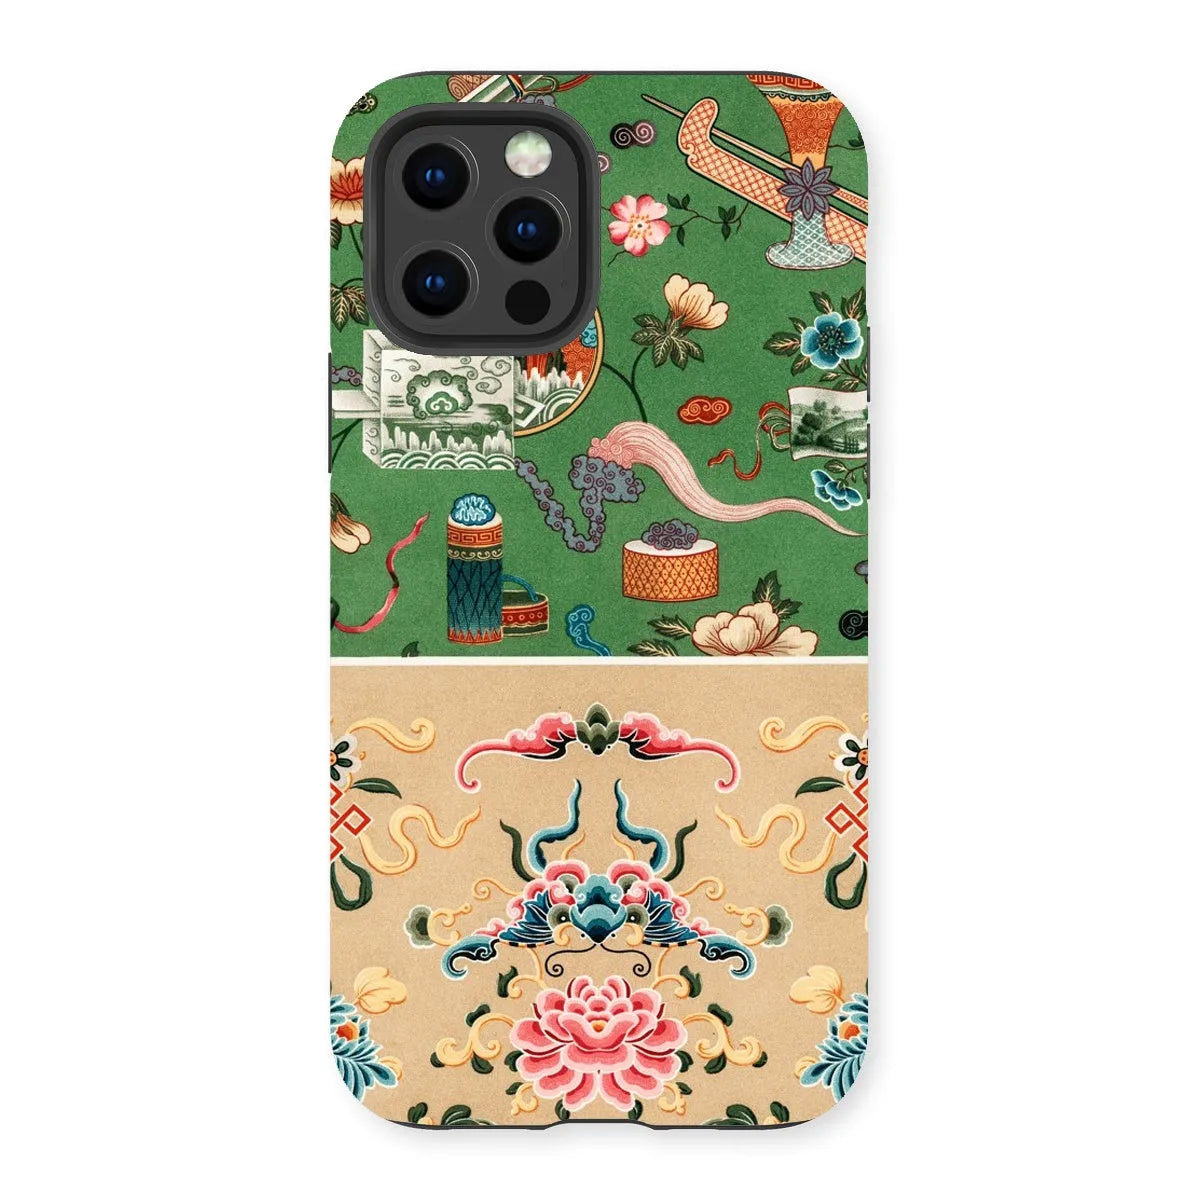 This Chinese Pattern By Auguste Racinet Tough Phone Case - Iphone 13 Pro / Matte - Mobile Phone Cases - Aesthetic Art